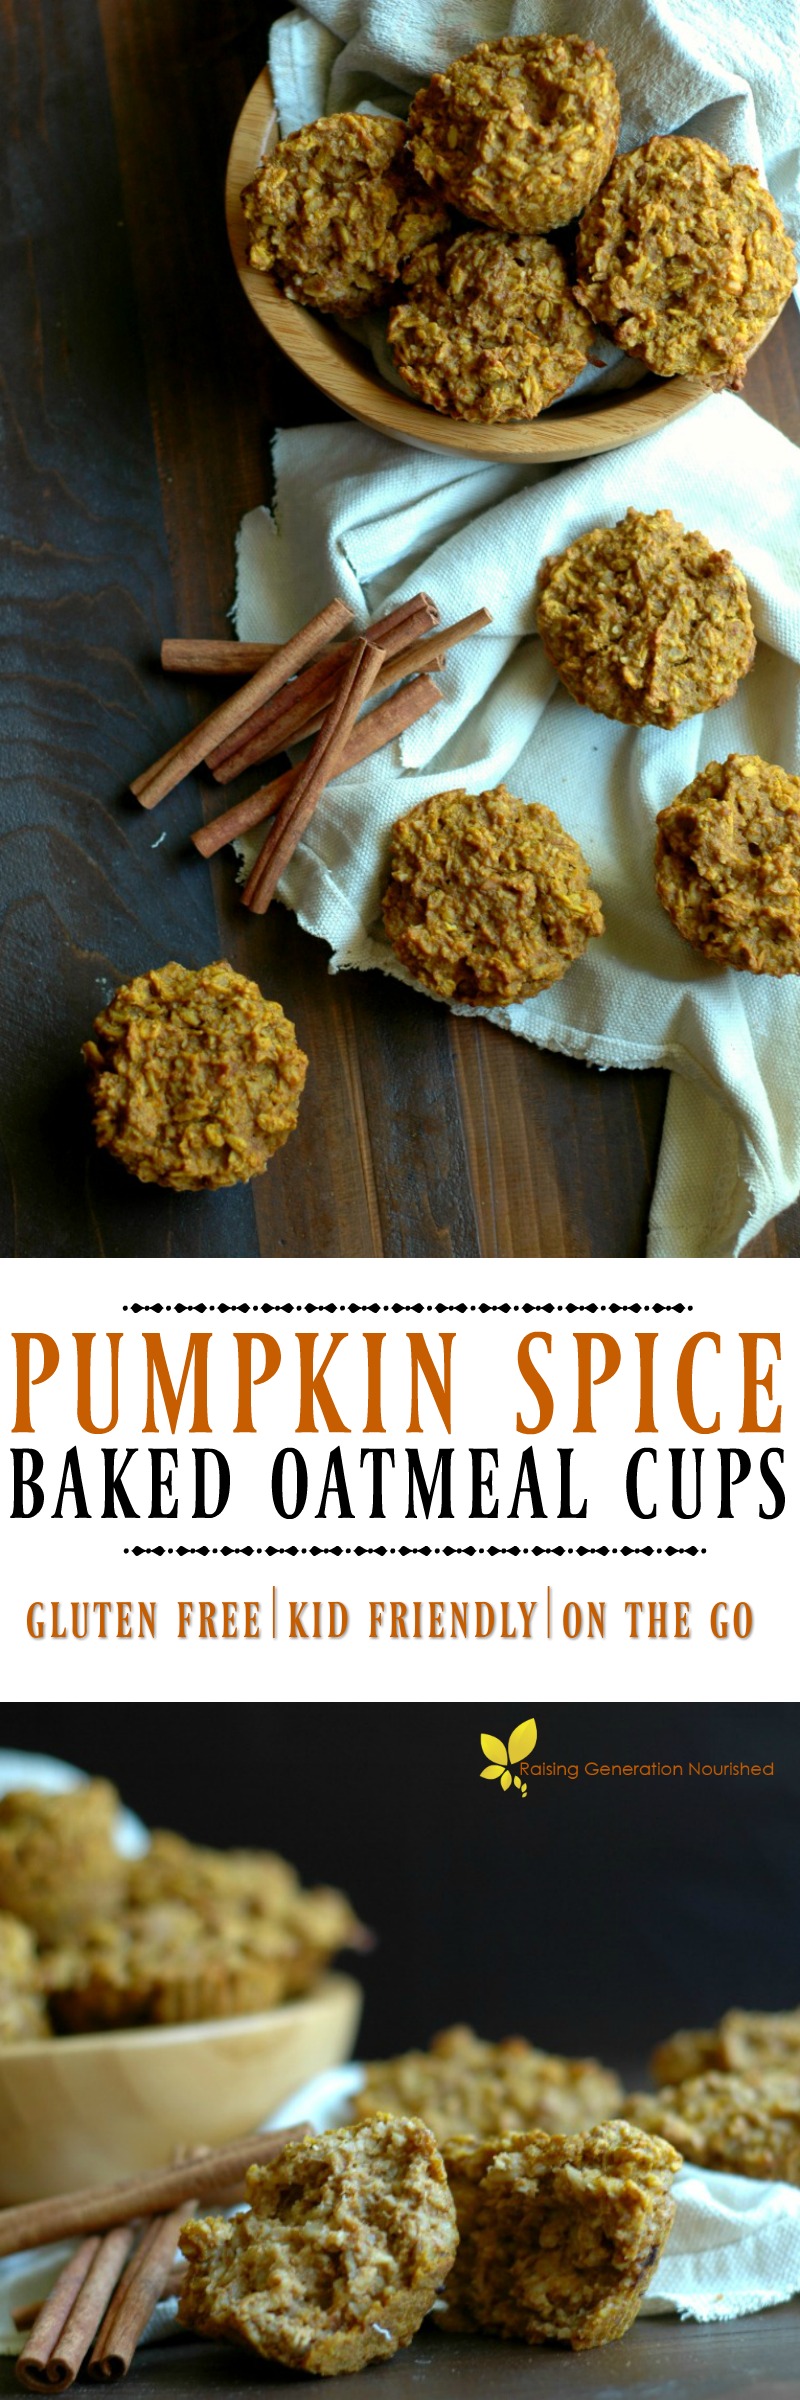 Pumpkin Spice Baked Oatmeal Cups :: Baked oatmeal to go! Pumpkin spice style and kid approved for a busy fall day!